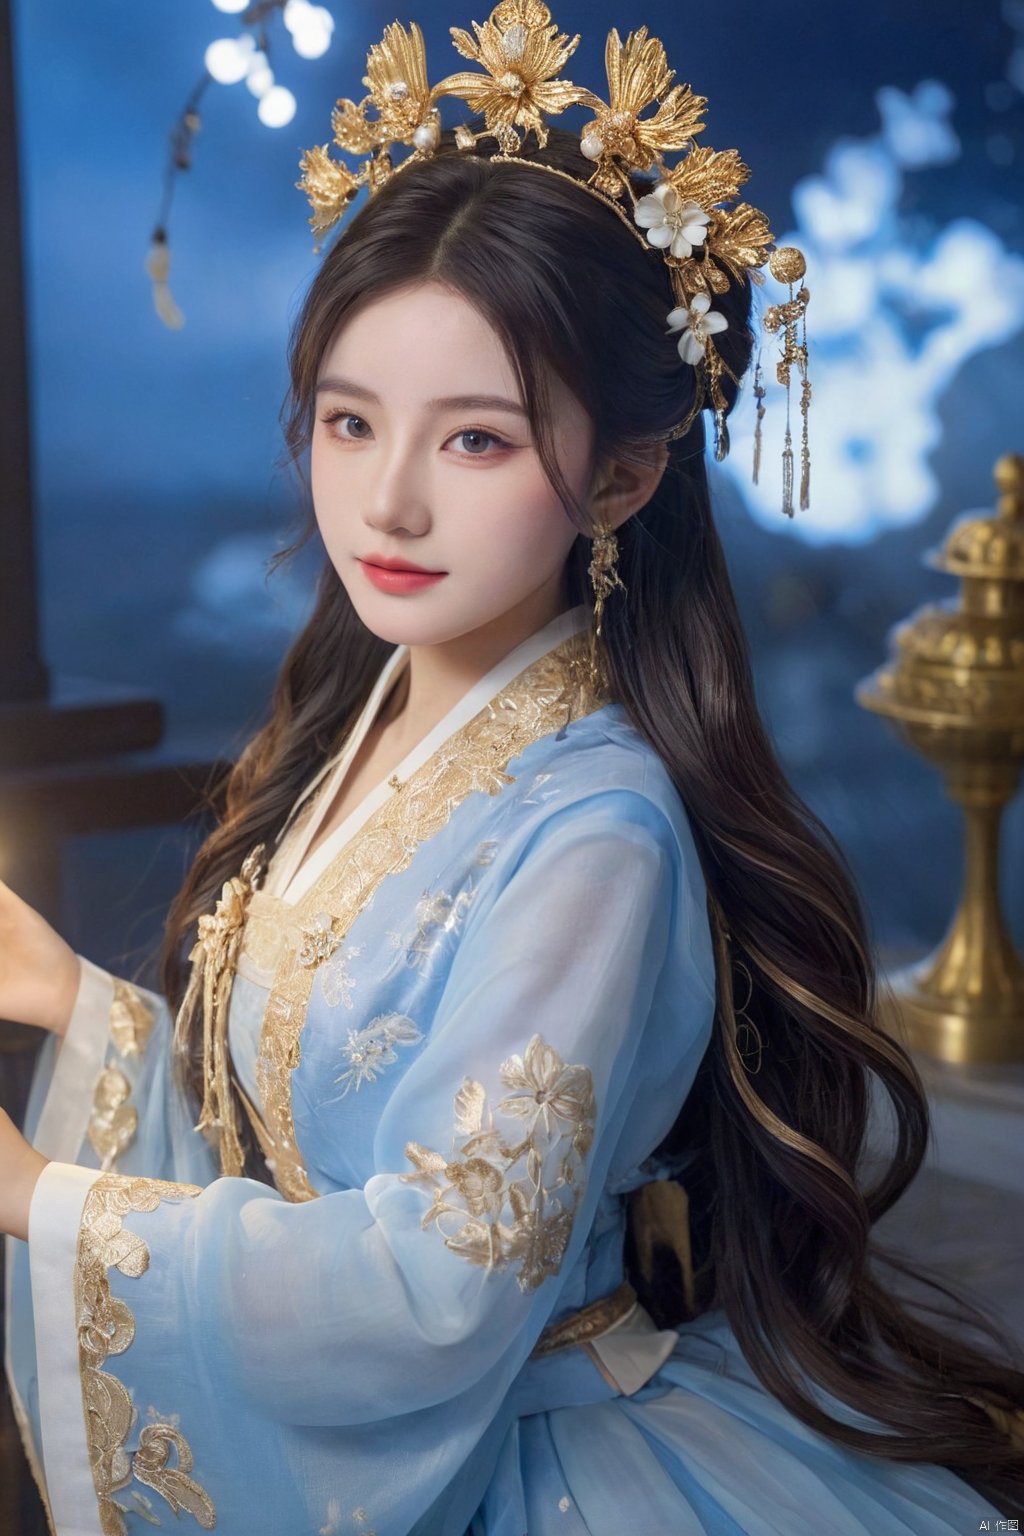  HUBG_Rococo_Style(loanword), 1girl, hanfu, Portrait of noble and graceful goddess, dressed in blue and gold, elaborate coiffure hairstyle, dark hair, decoration, 16K, UHD, HDR, Brilliant scene with bright lights, mist, numerous decorations, joyful atmosphere, light smile,HDR, IMAX, 8K resolutions, ultra resolutions, magnificent, best quality, masterpiece,cinematic scenes, cinematic shots, cinematic lighting, volumetric lighting, ultra-detailed, hubg_beauty_girl